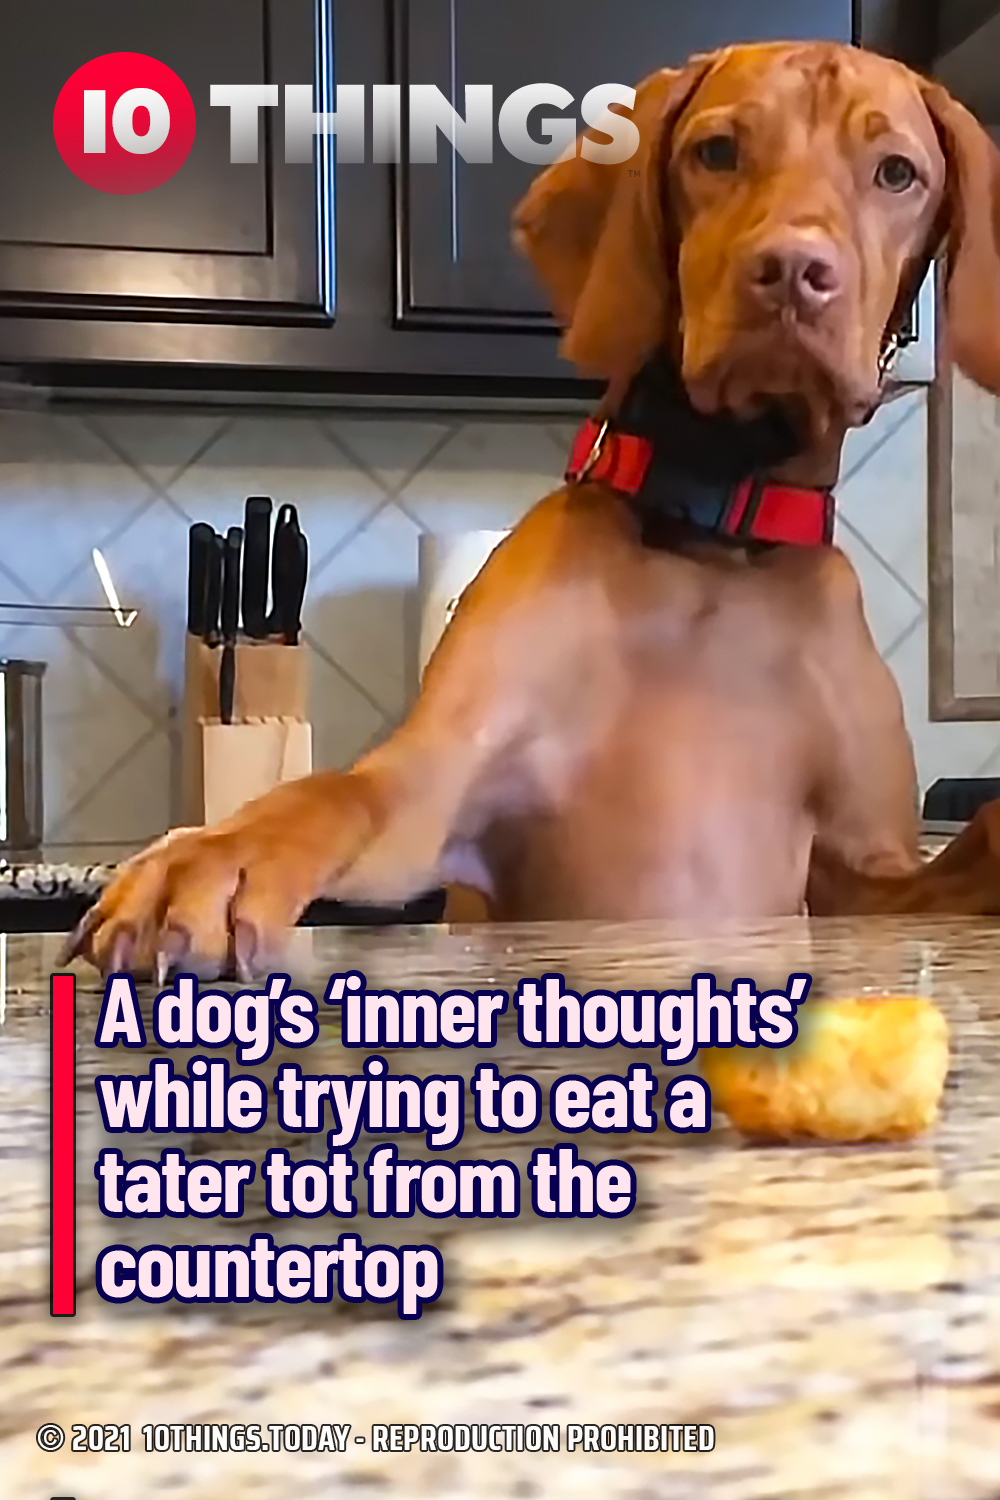 A dog’s ‘inner thoughts’ while trying to eat a tater tot from the countertop